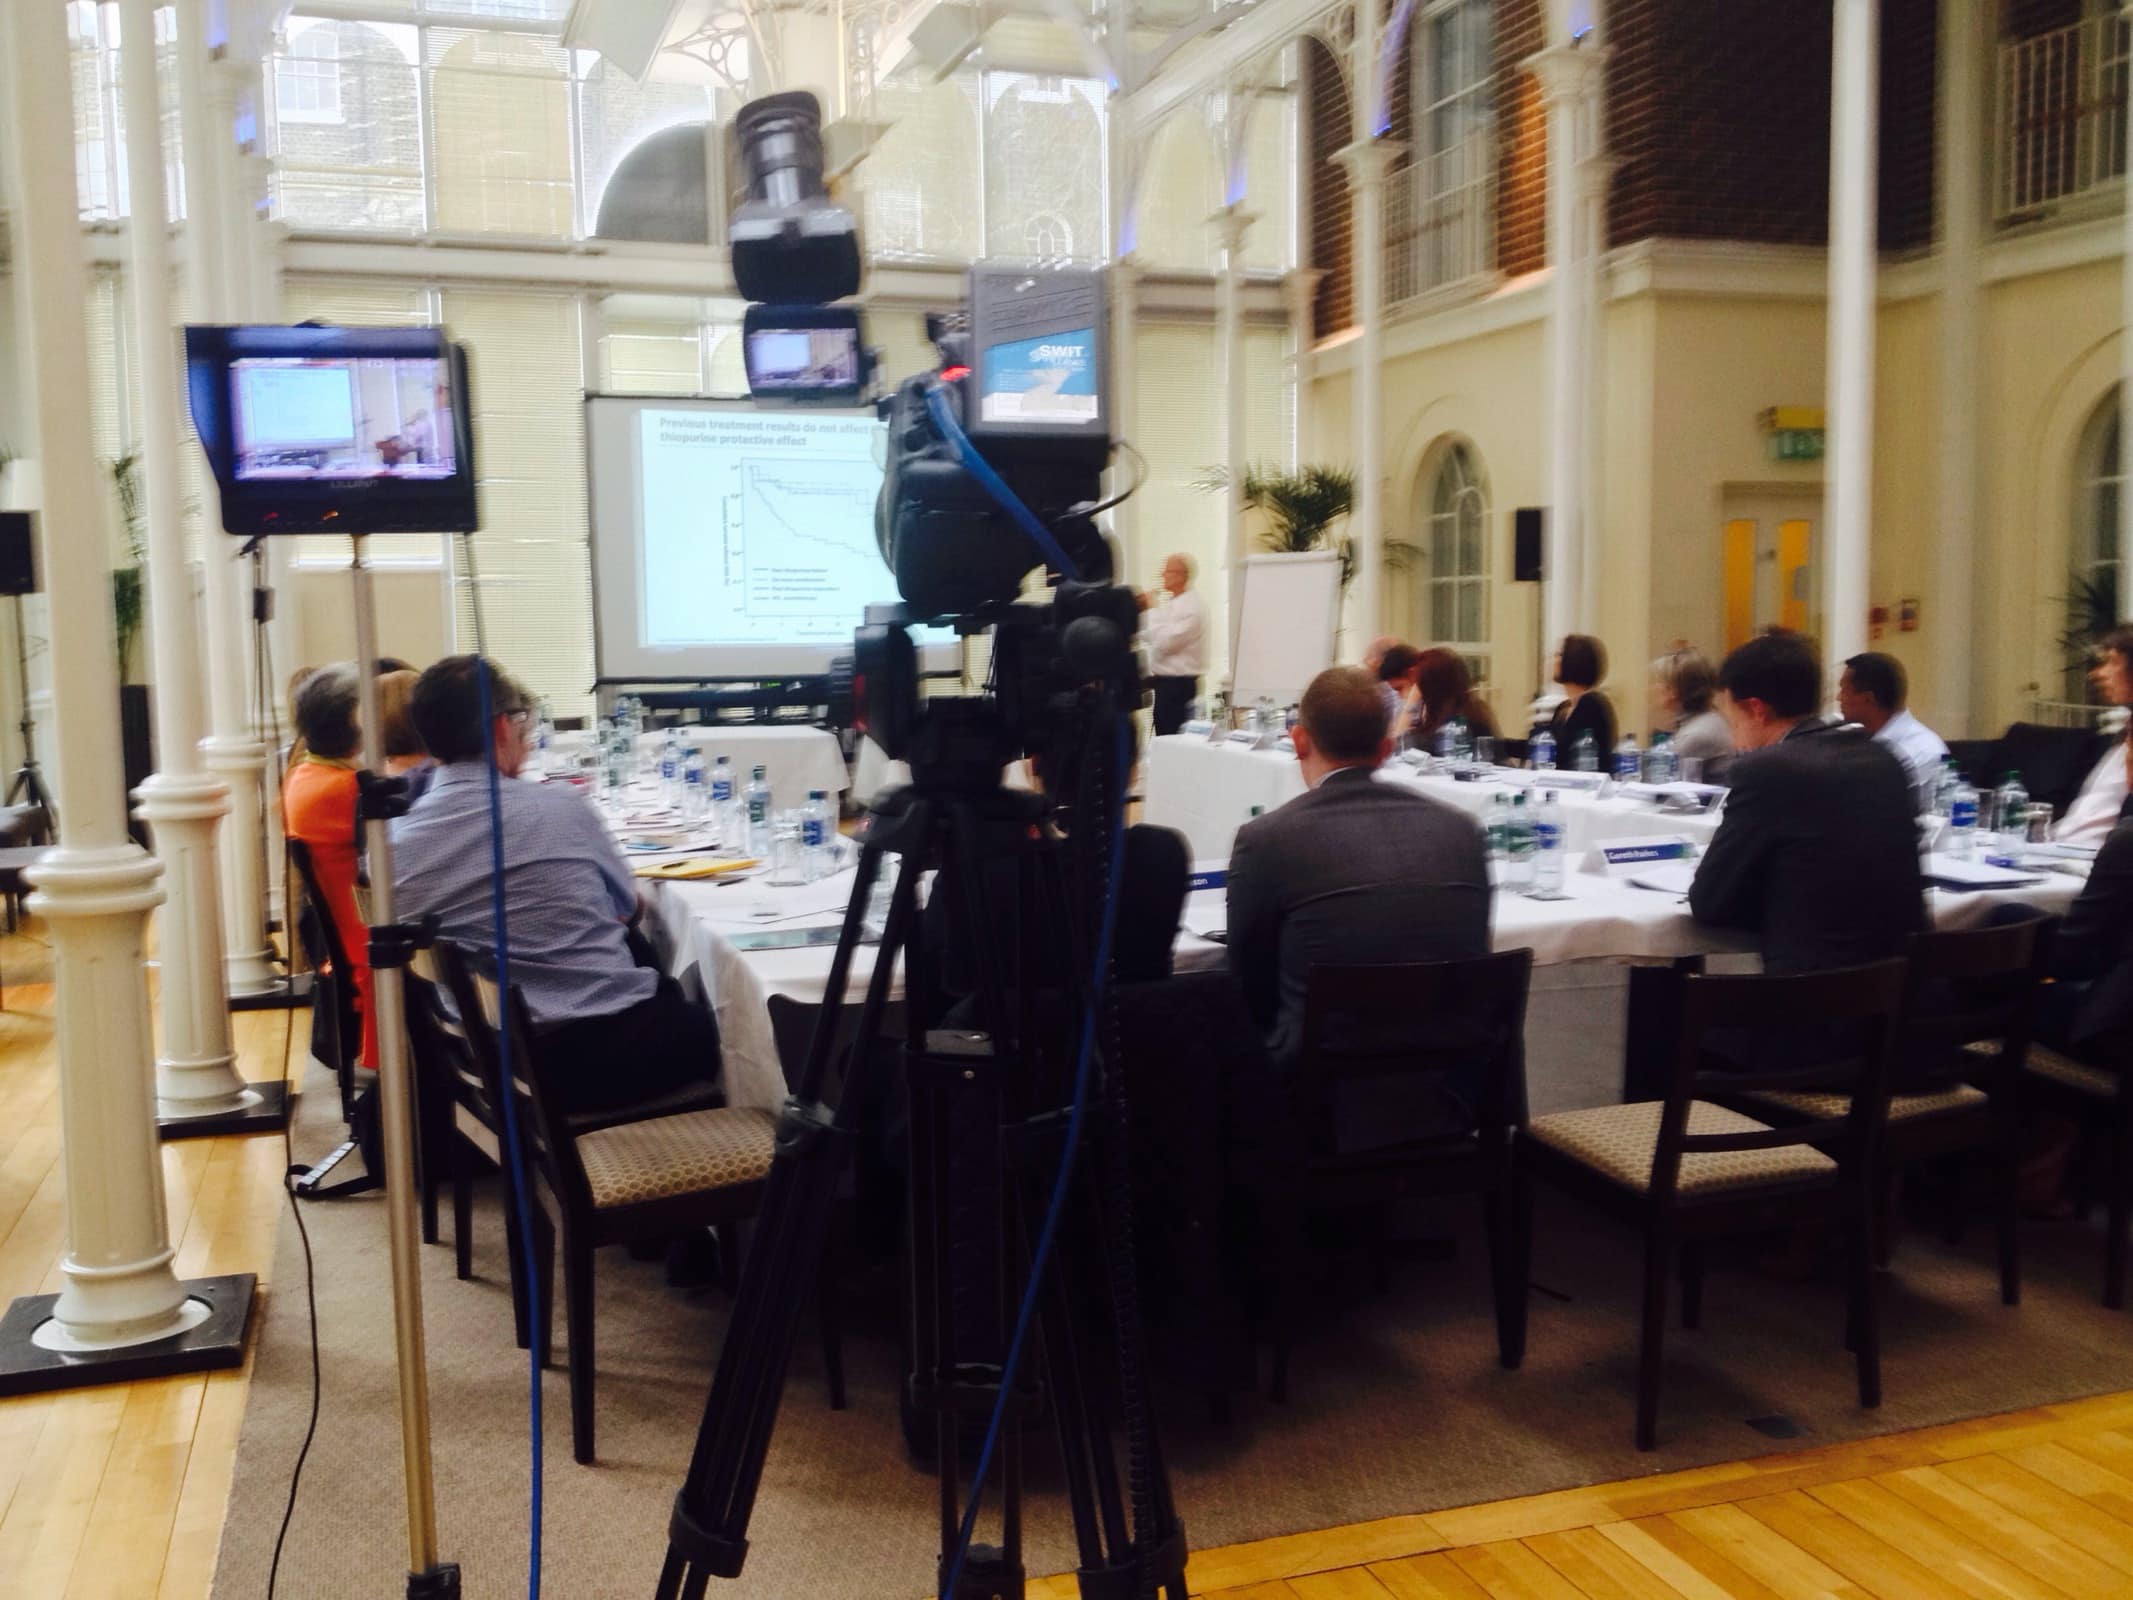 Filming abbvie medical conference london